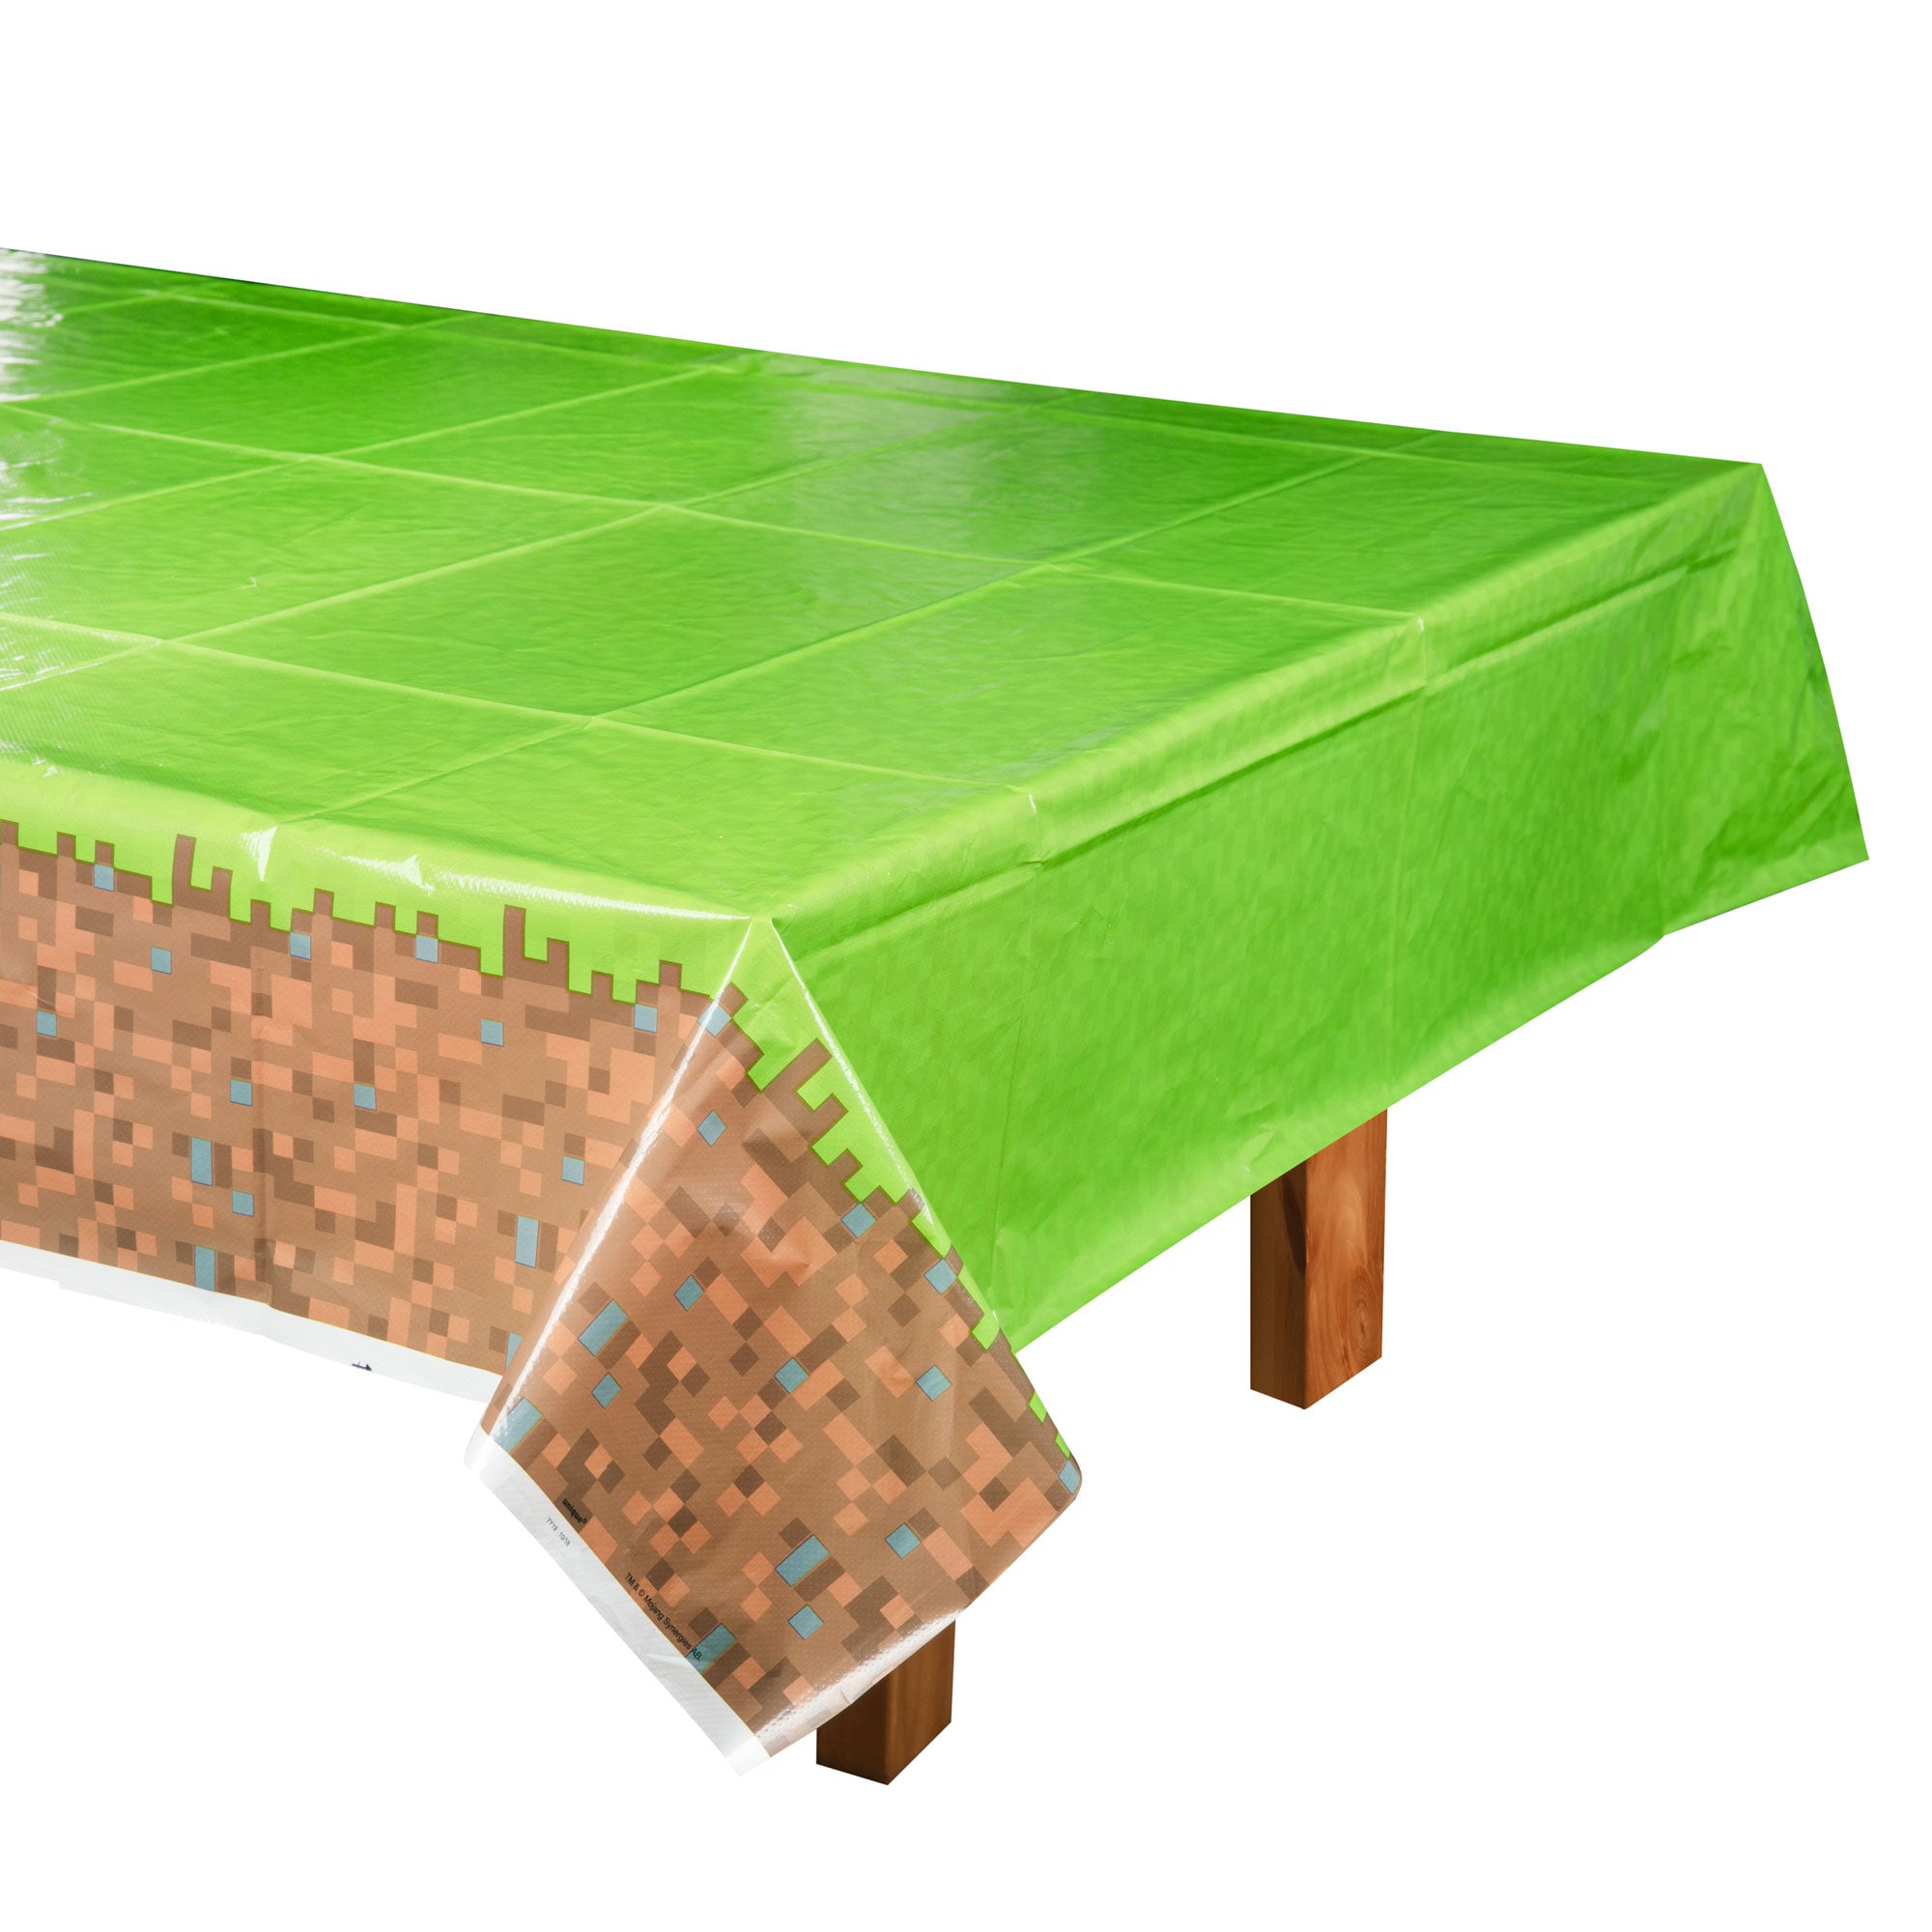 Minecraft Grass Block Plastic Table Cover Official Minecraft Store Powered By J Nx